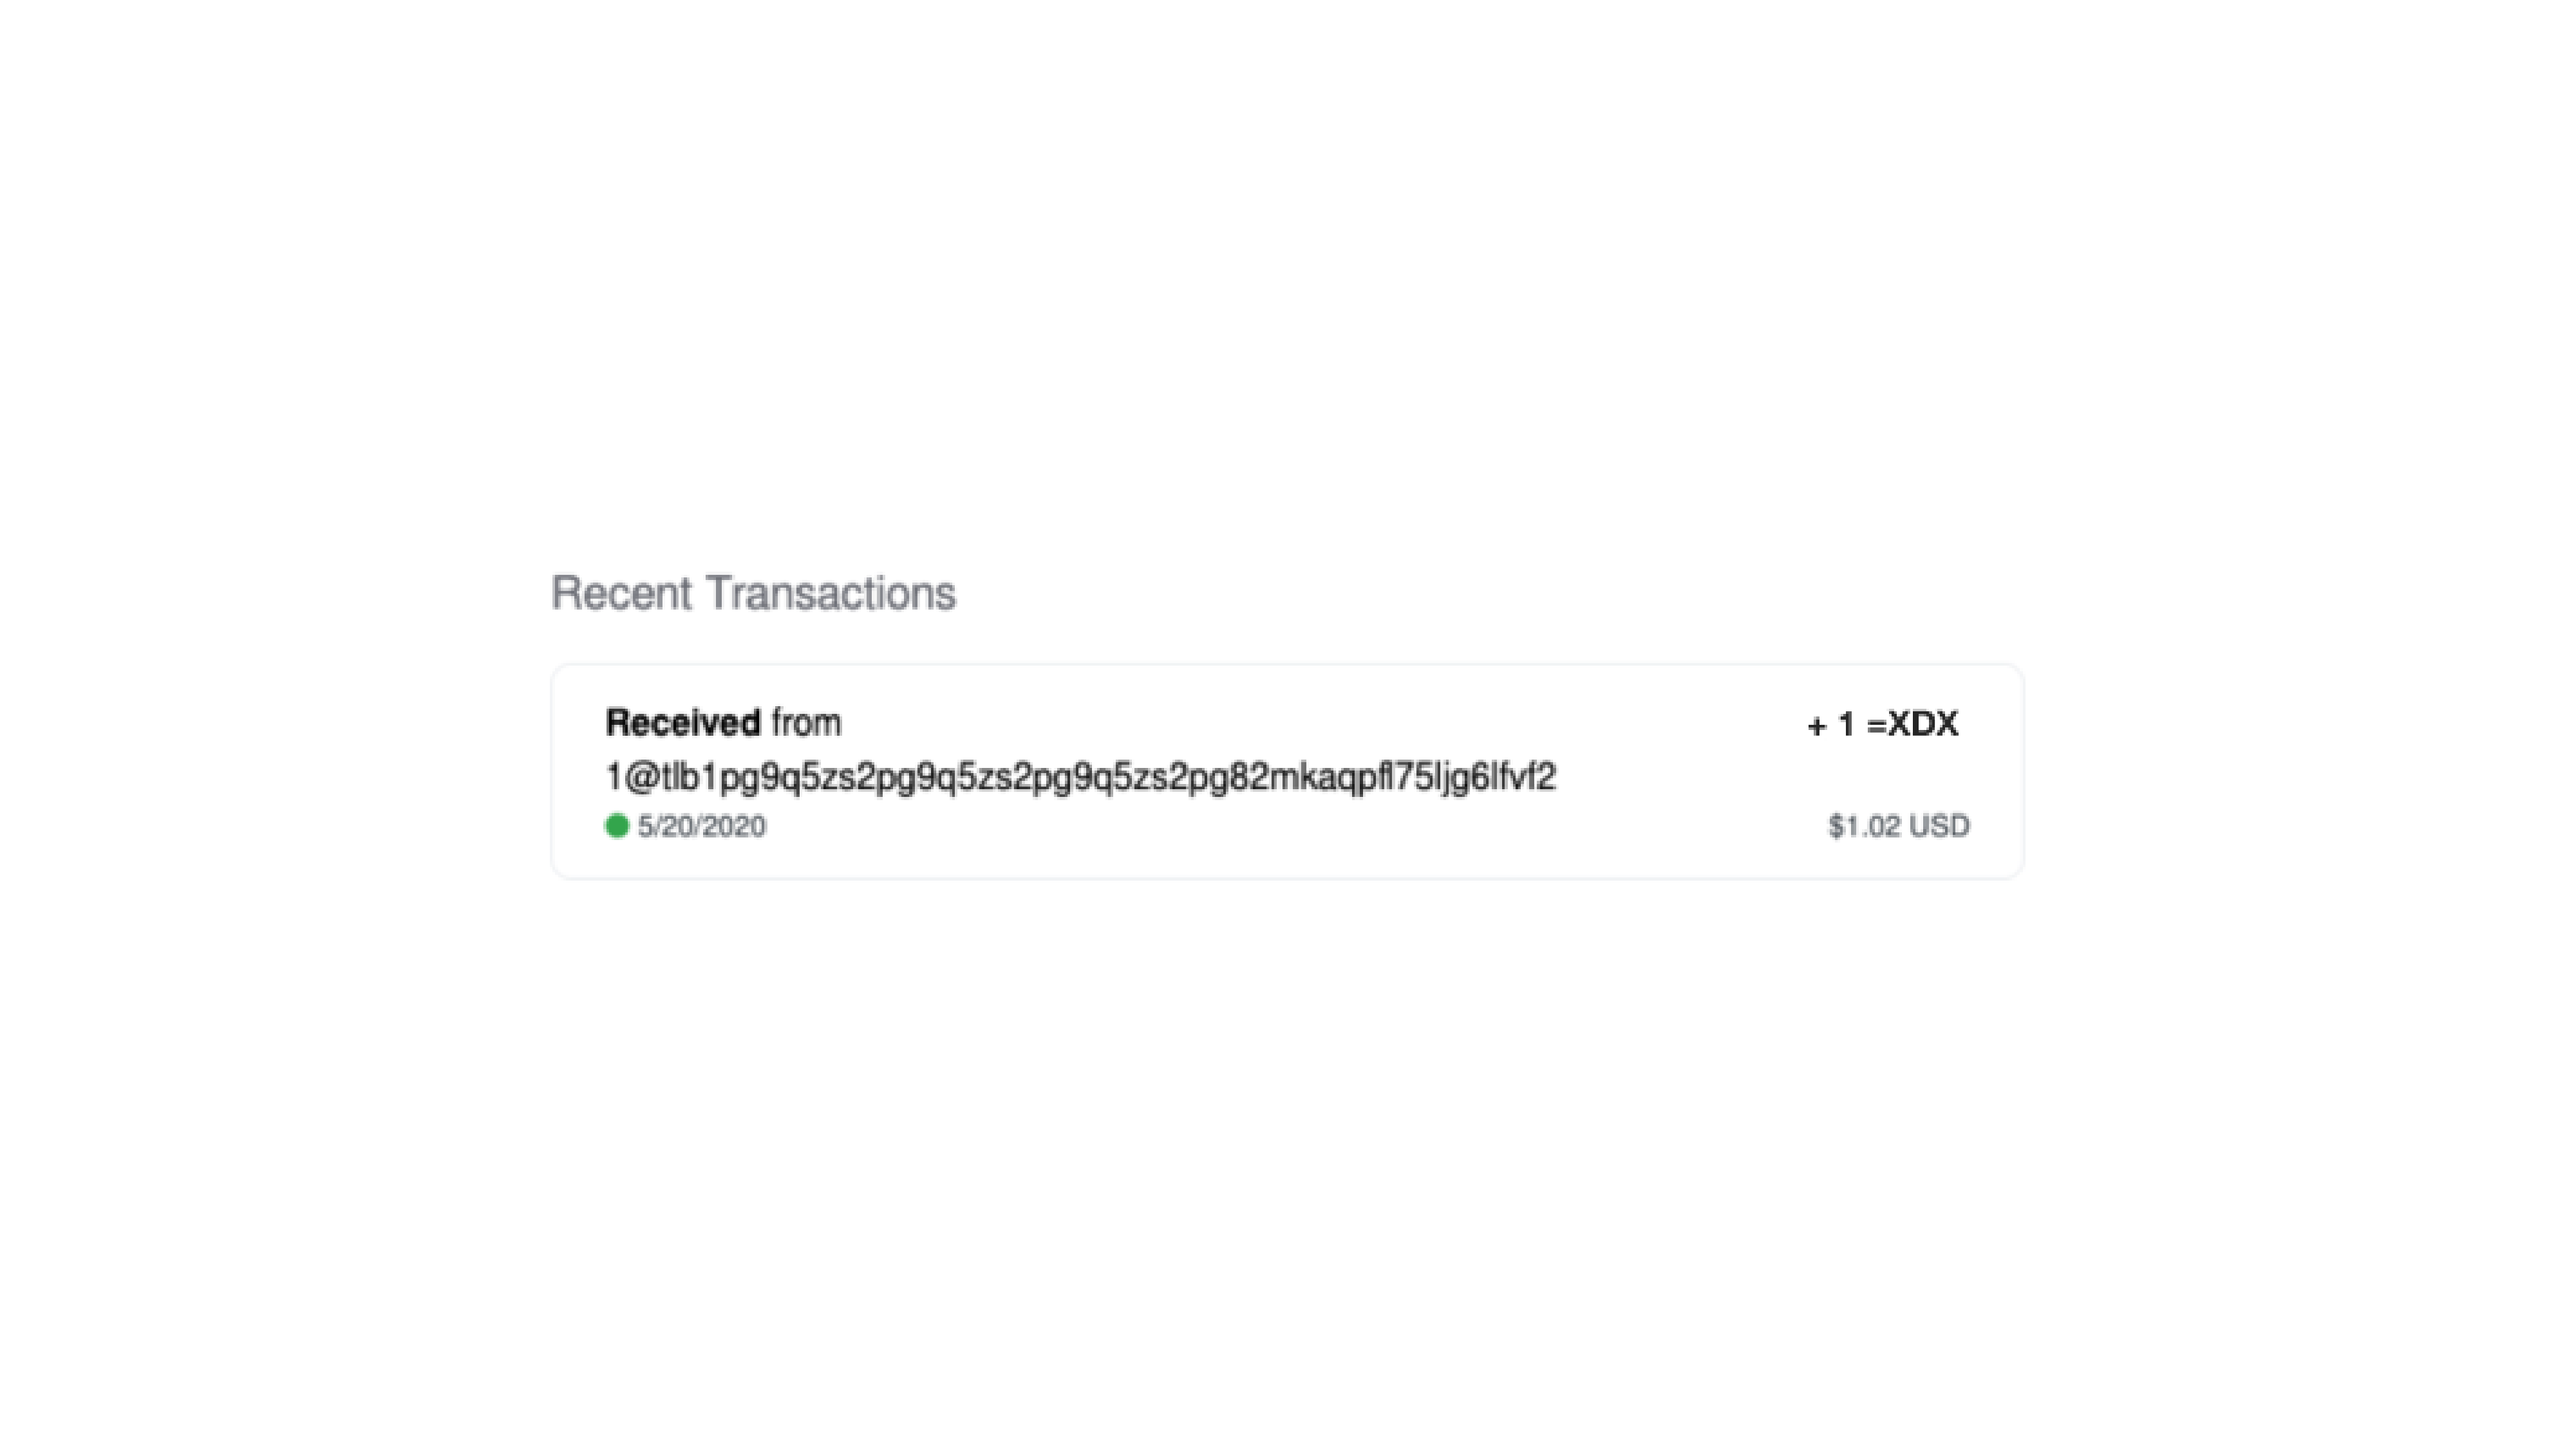 Figure 3.0 View list of transactions